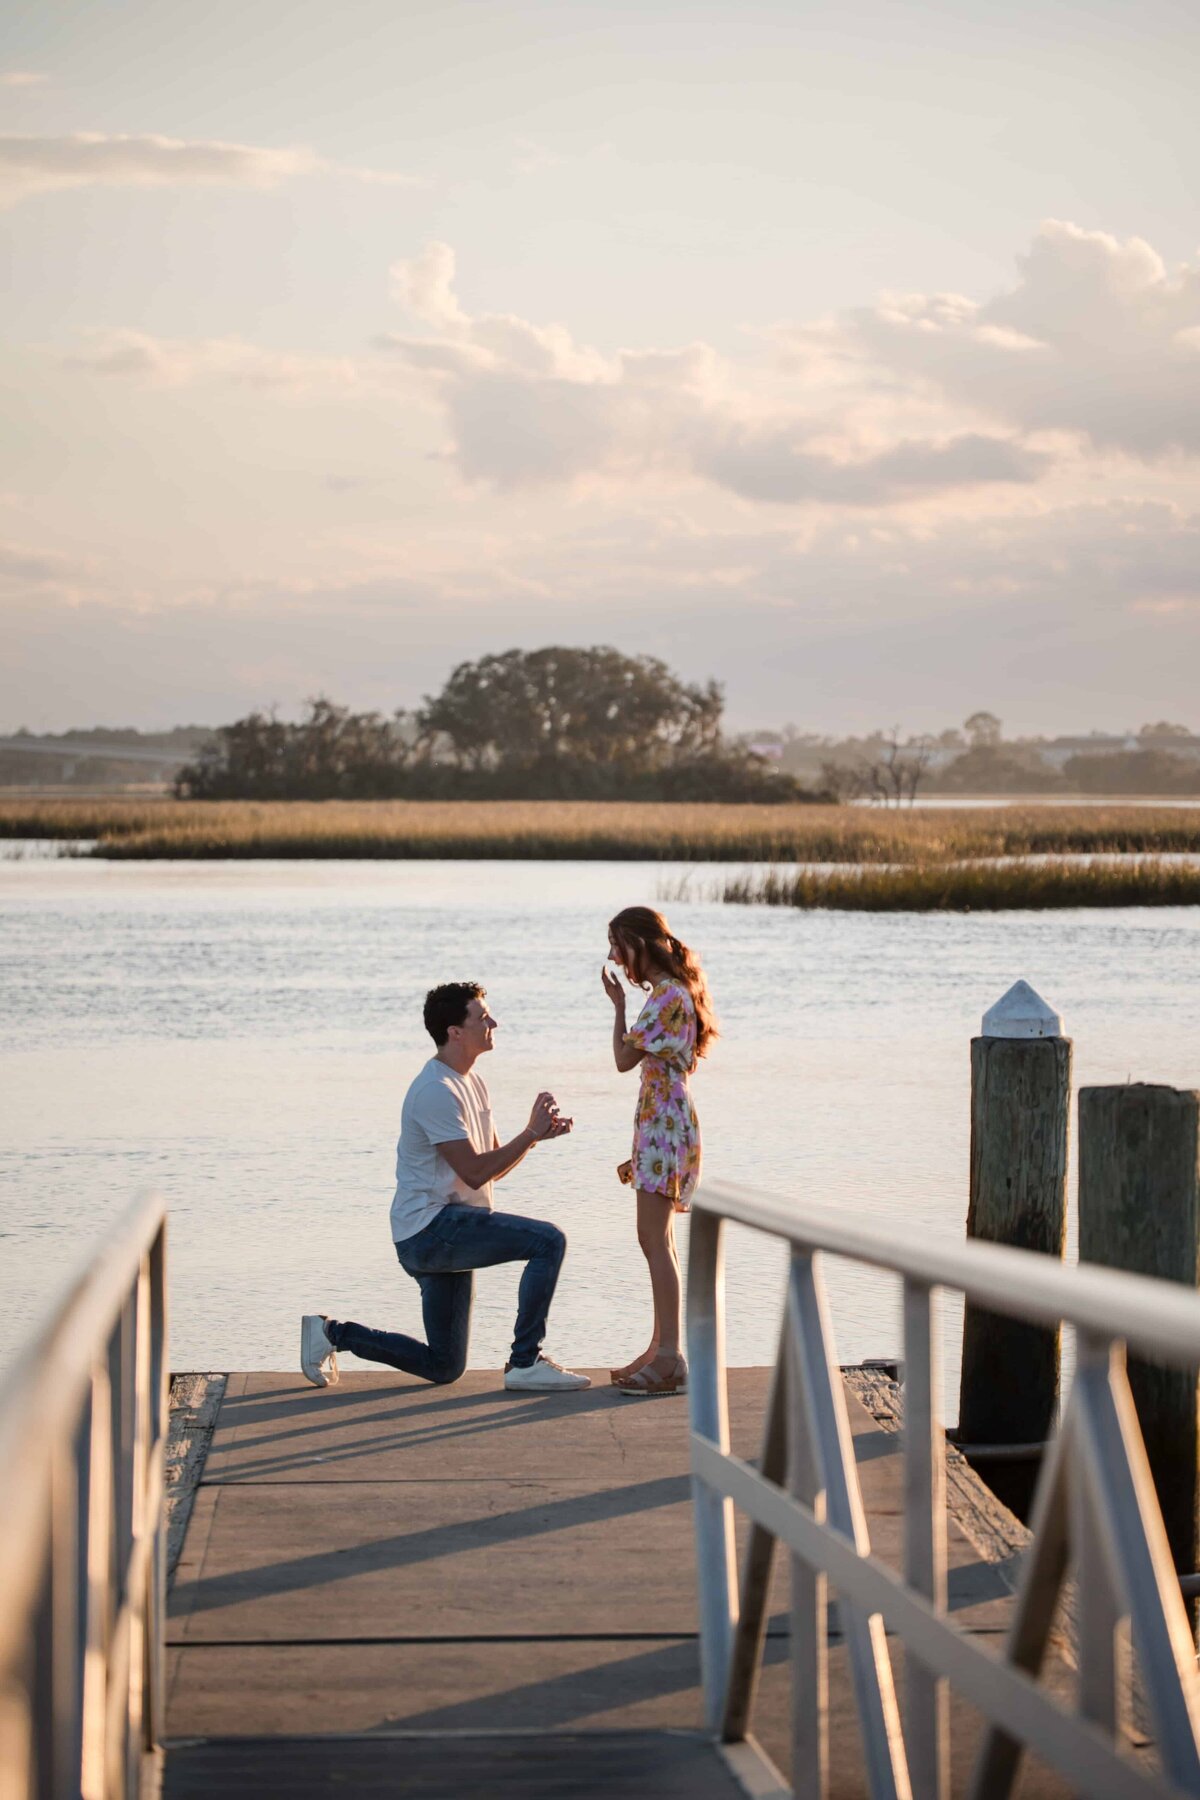 Surprise Proposal in Jacksonville by Phavy Photography